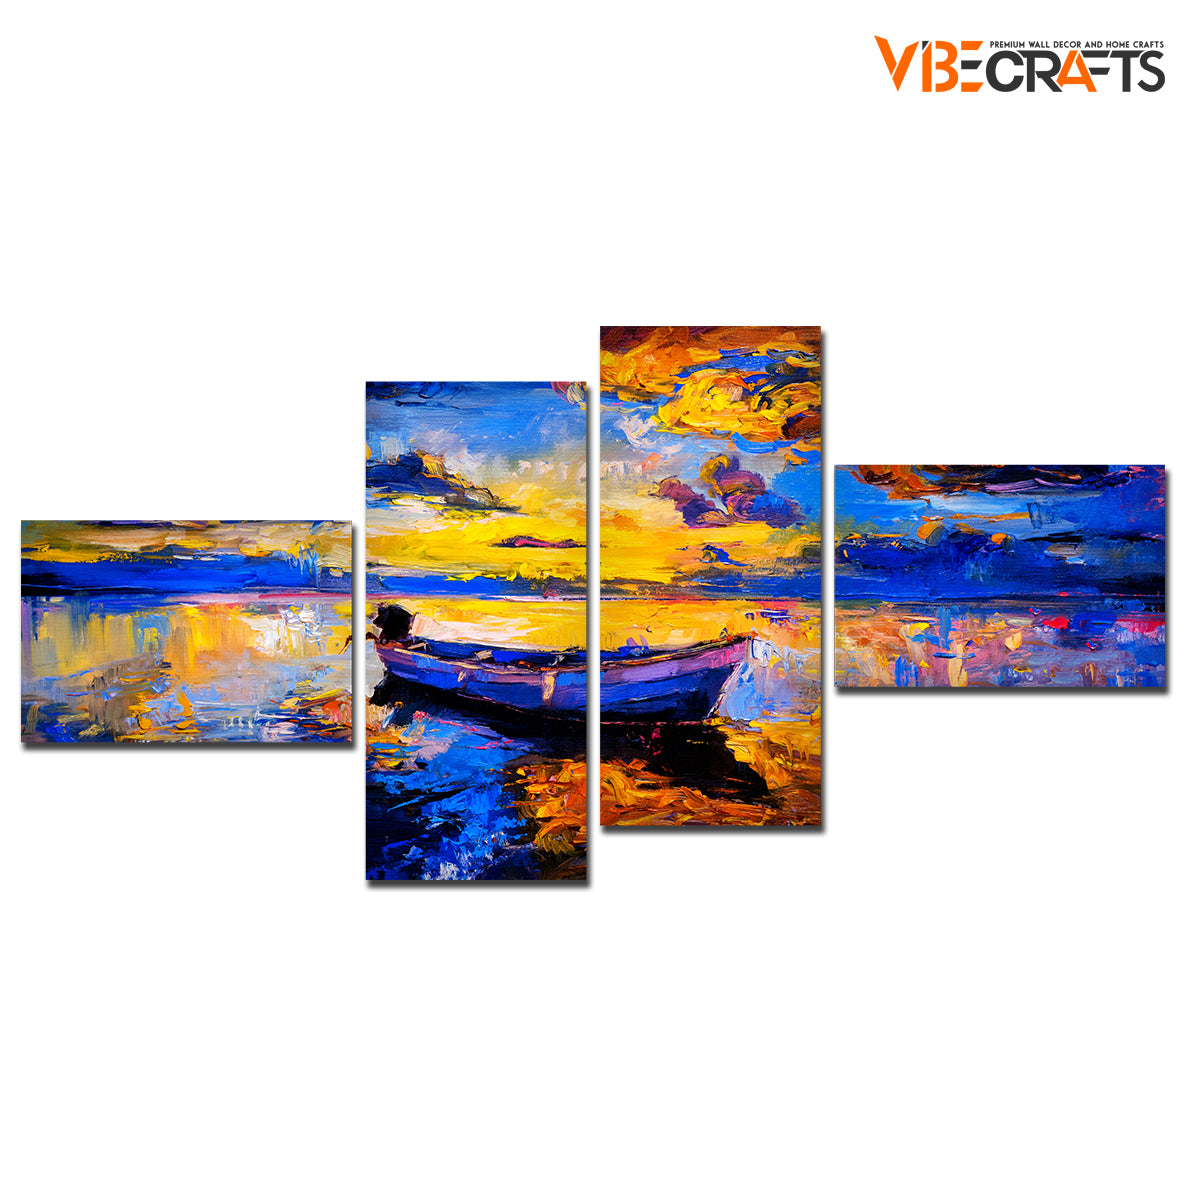 Premium Wall Painting of Sky Sunset and Boat on the Water